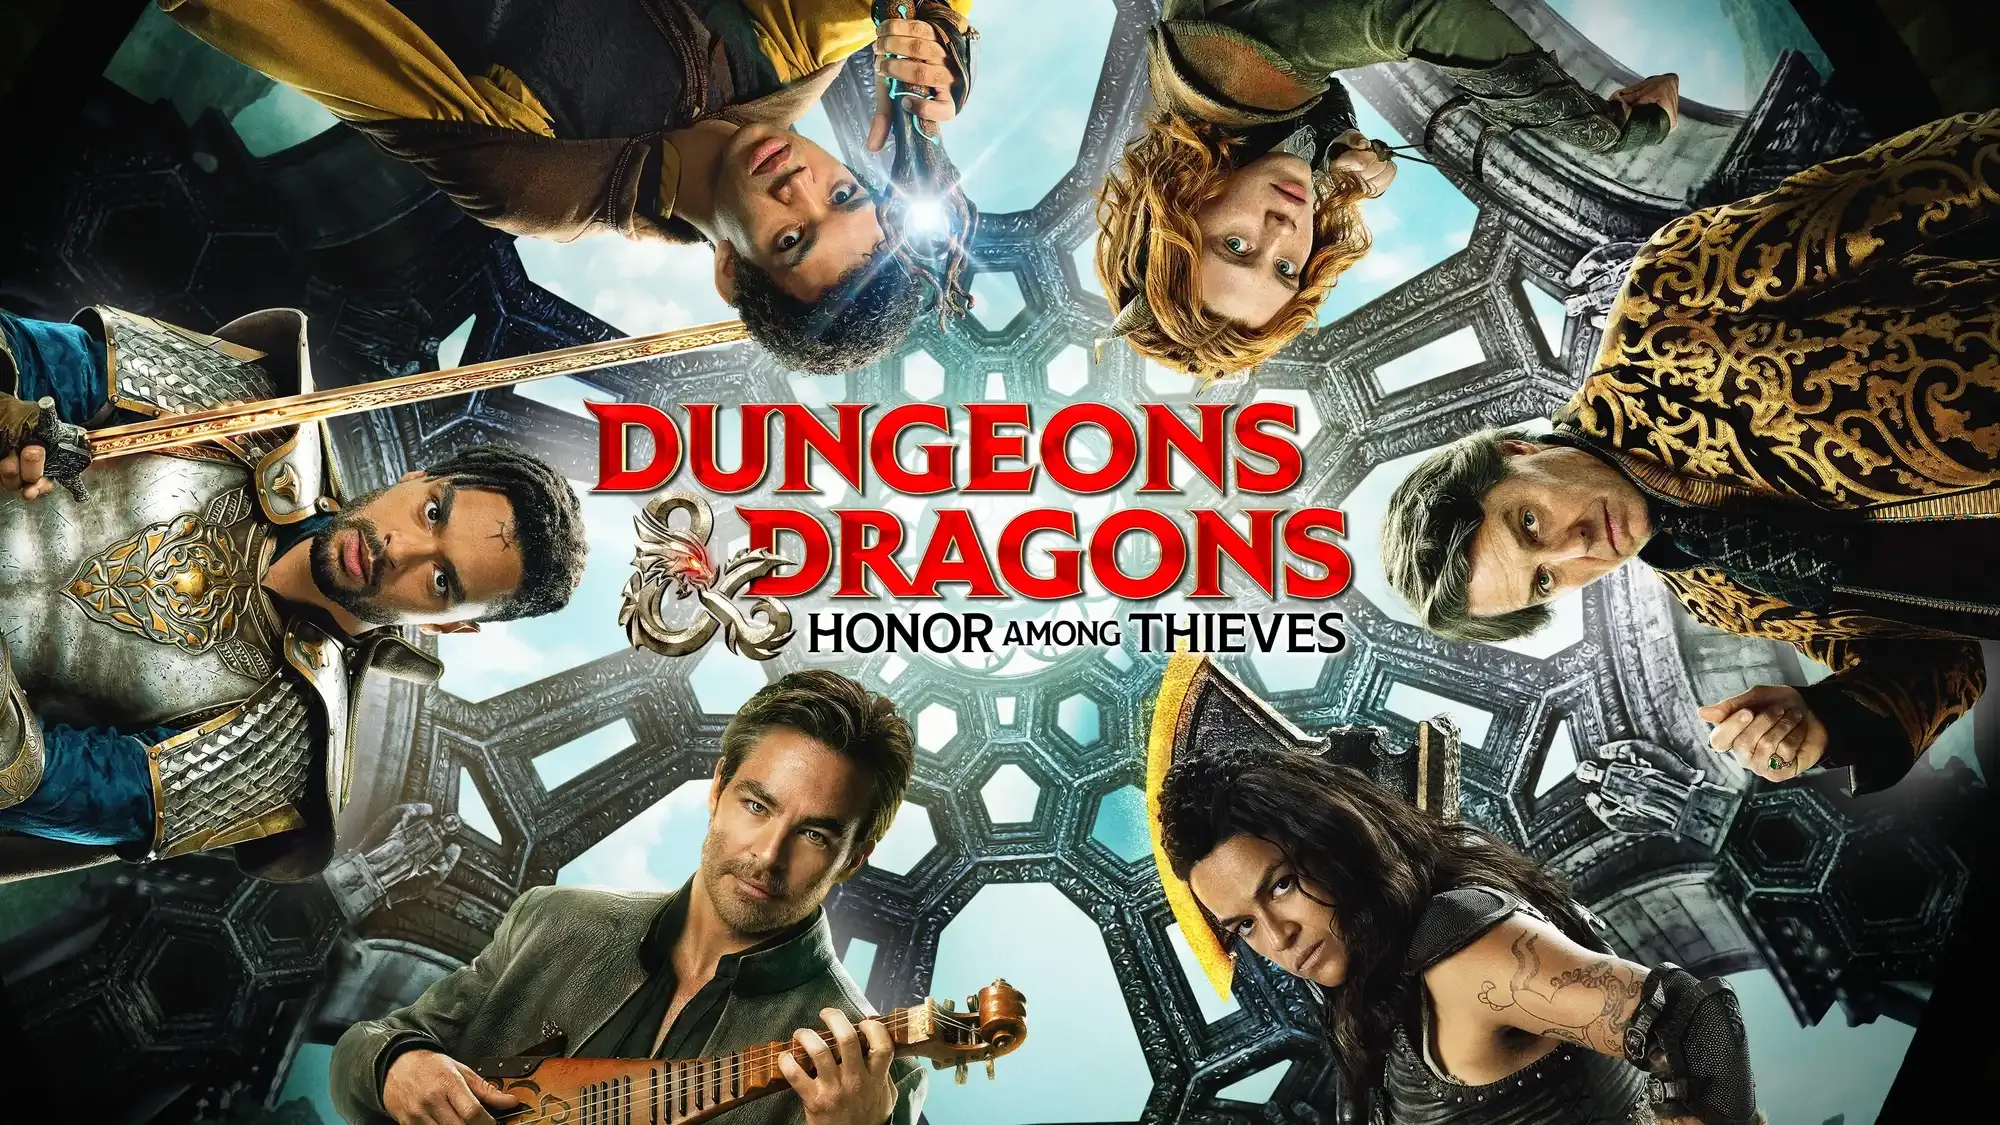 Dungeons & Dragons: Honor Among Thieves movie review